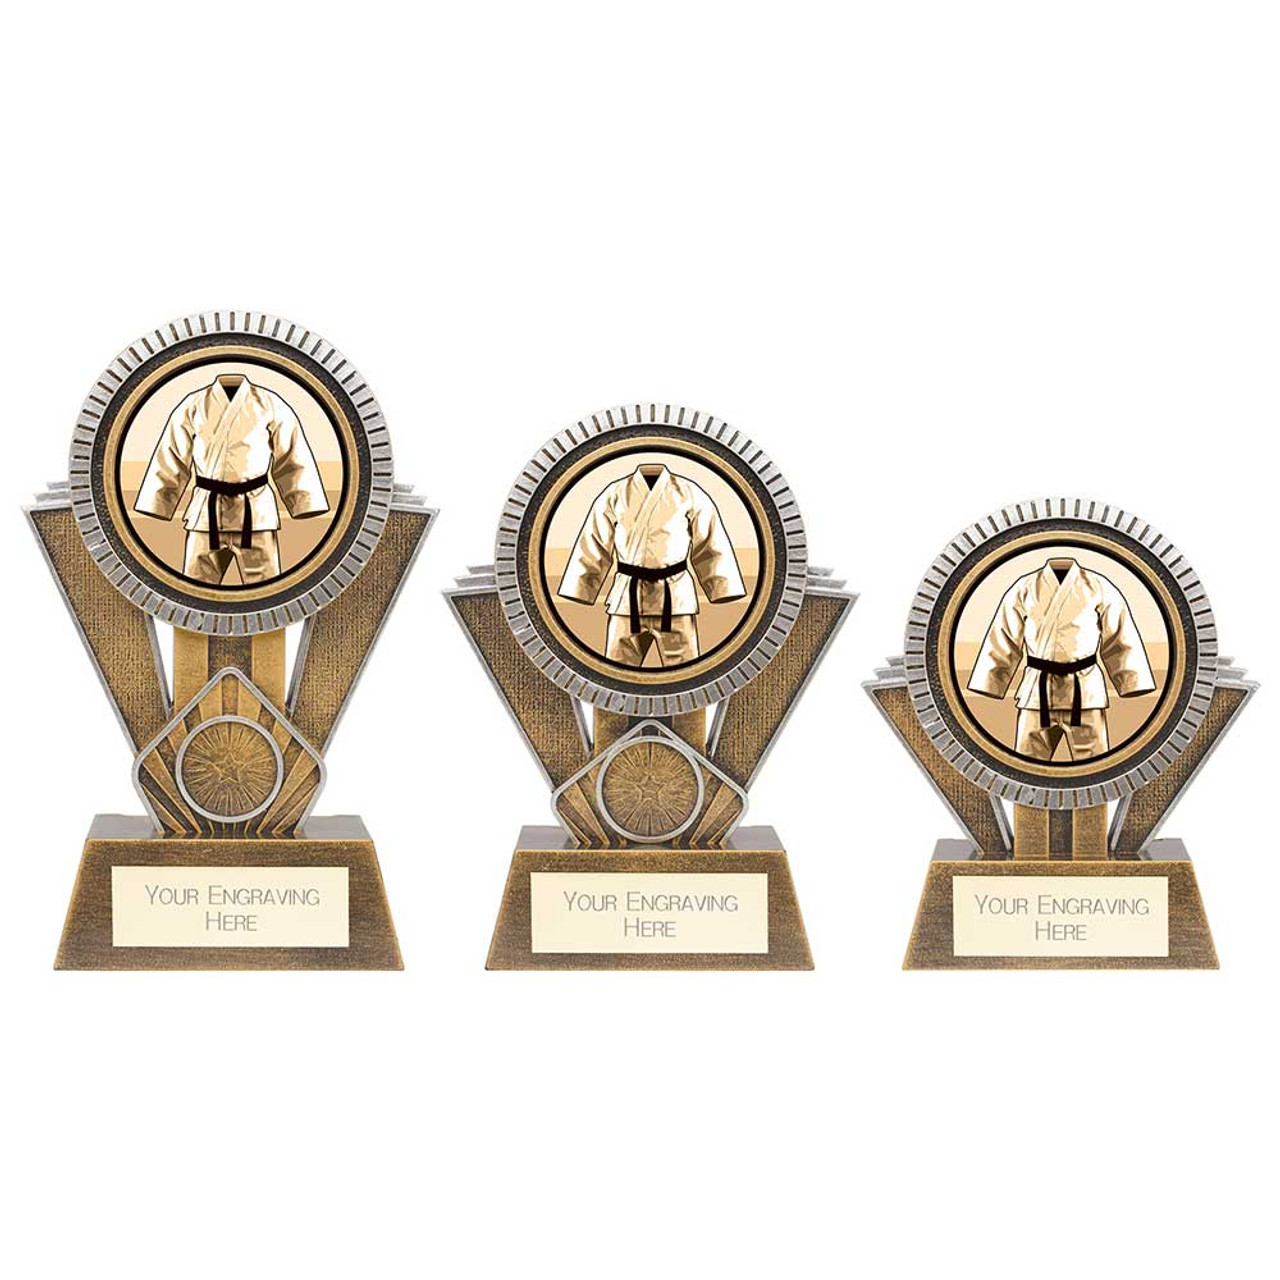 Apex Martial Arts Gi Trophy in 3 sizes